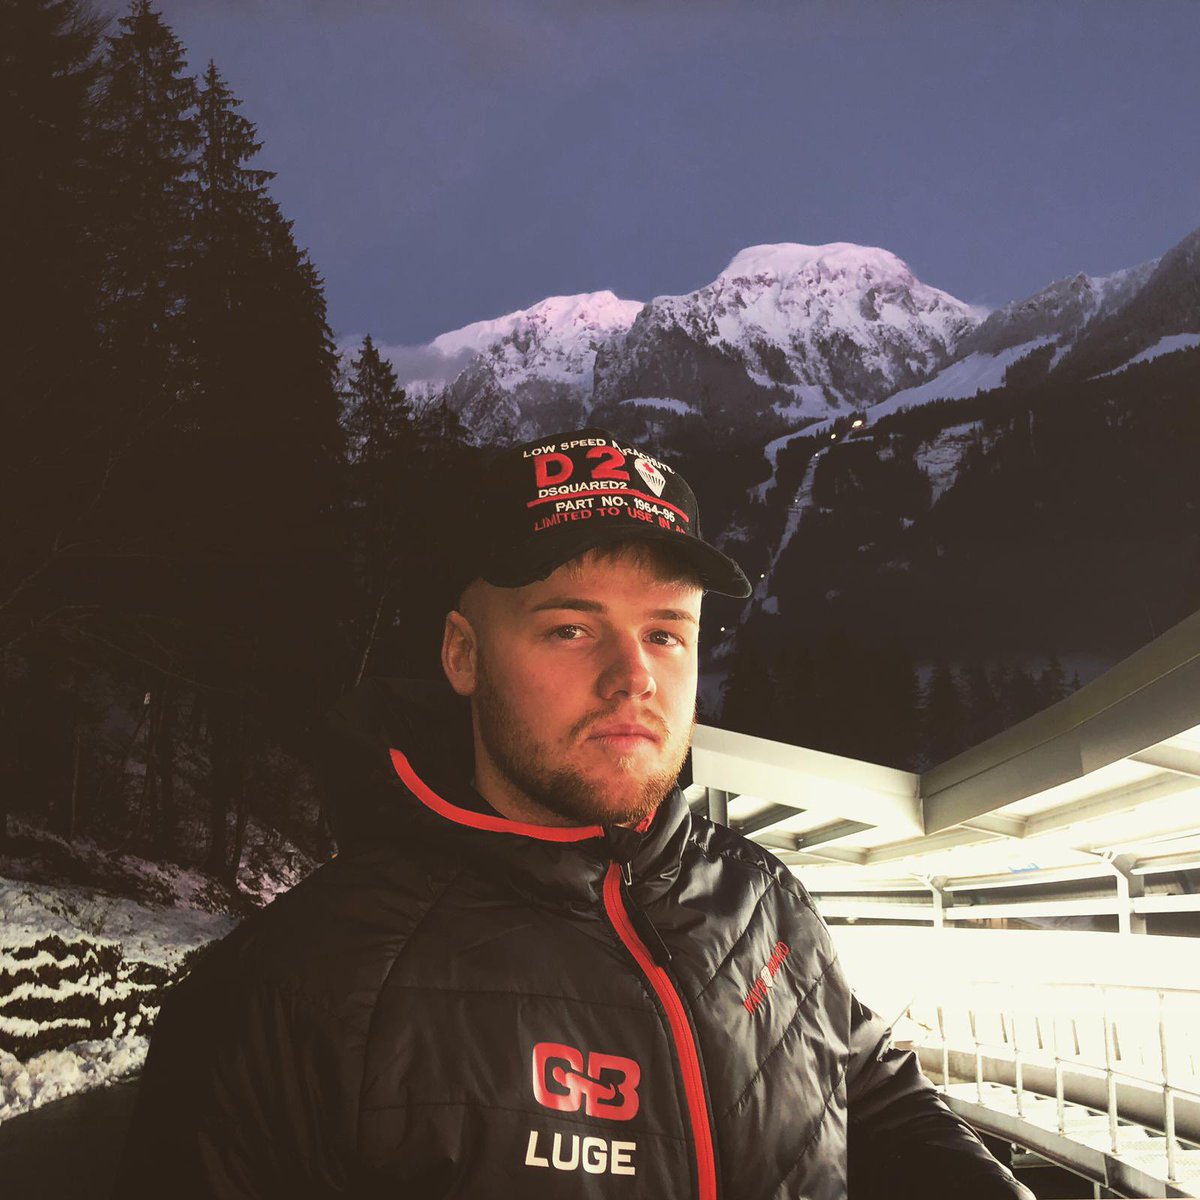 Introducing our newest Elite Athlete! SAC Luke Farrar 23 years old Olympic Luge Elite Athlete since September 2020 We’ll learn more about Luke, his sport and his future goals throughout the week. #MeetTheElite #OlympicLuge #RAFSport @raficesports @LugeGb